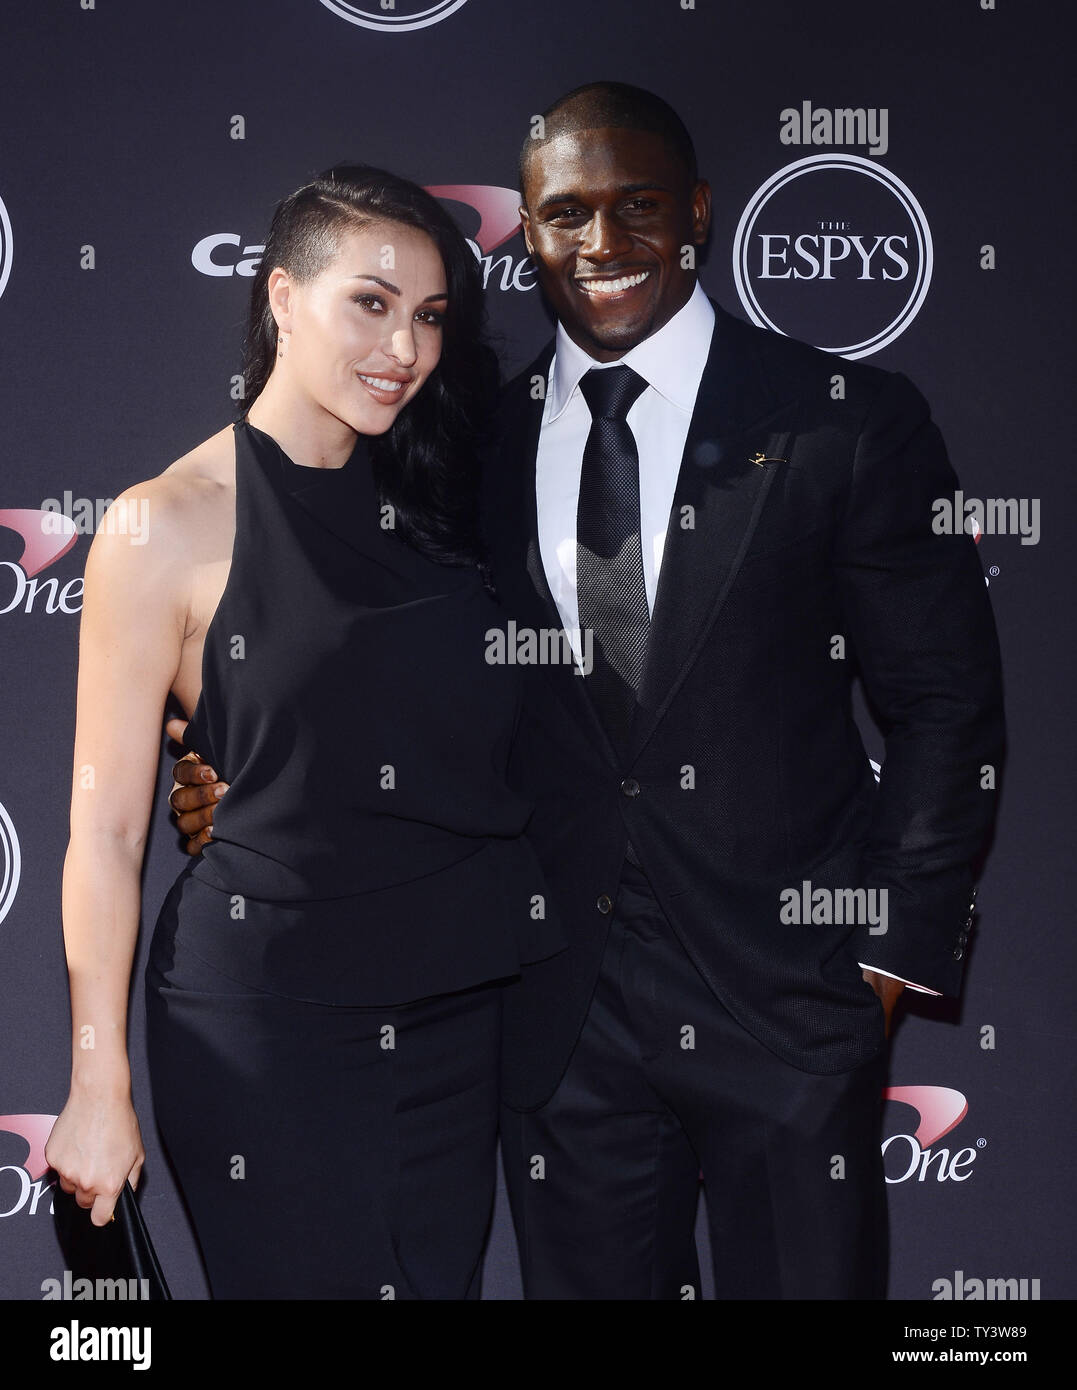 NFL player Reggie Bush and his girlfriend Lilit Avagyan attend the 2013 ESPY Awards at the Nokia Theatre L.A. Live in Los Angeles on July 17, 2013.   UPI/Jim Ruymen Stock Photo